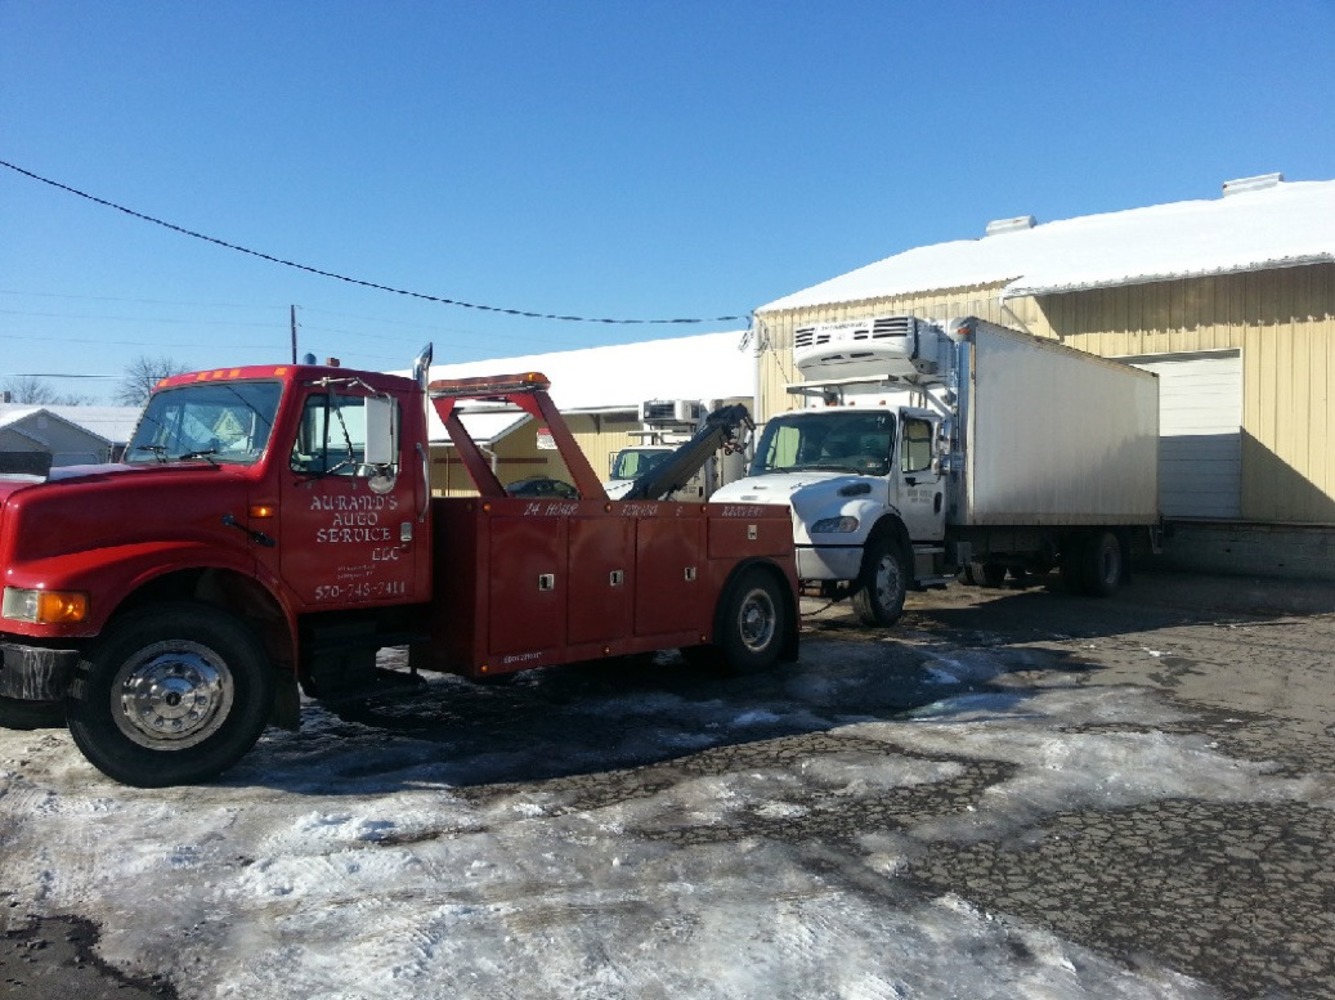 Aurand's Towing